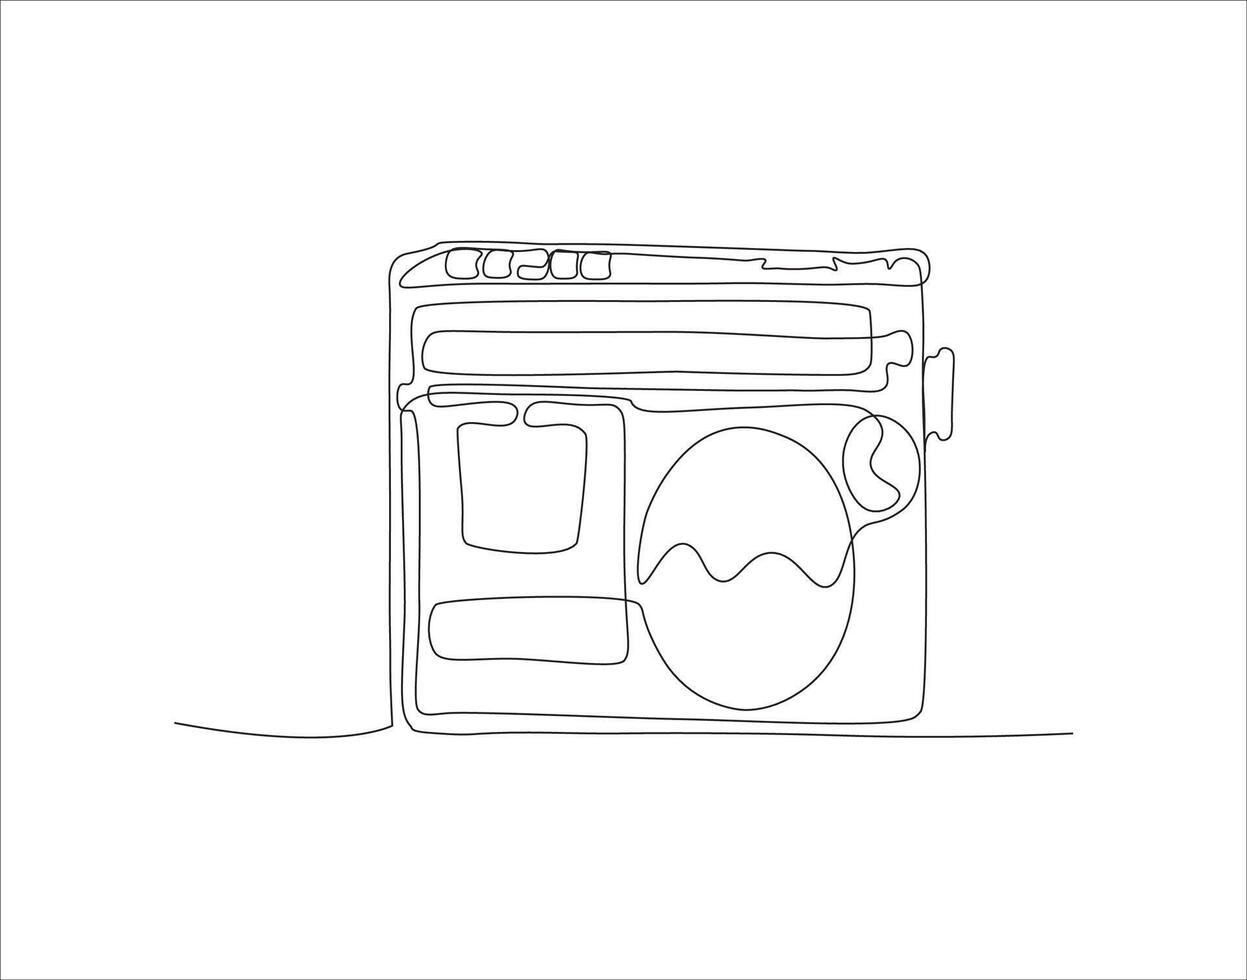 Continuous Line Drawing Of Old Fashioned Analog Radio Tape. One Line Of Radio Tape. Radio Tape Continuous Line Art. Editable Outline. vector